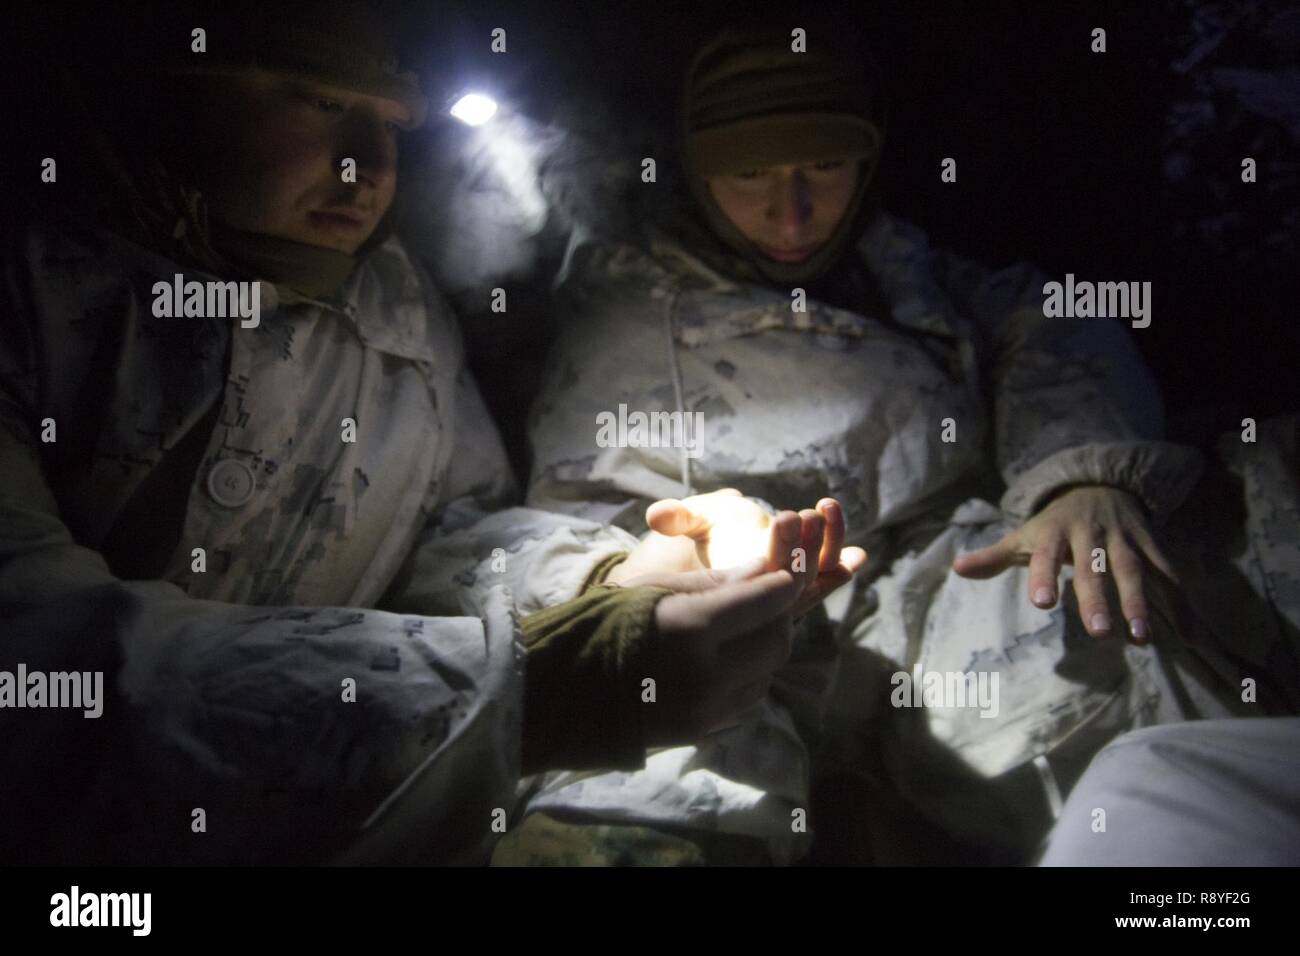 U.S. Marines Lance Cpl. Christopher Perez and Lance Cpl. Jacob Dement check fingers for cold weather injuries March 11, 2017, in the Arctic Circle of Norway.  Marine Rotational Force Europe 17.1 (MRF-E) participated in Exercise Joint Viking, a multilateral exercise between U.S., U.K., Norwegian, and Dutch forces. The partnership is built upon shared values, experiences, and vision. Dement and Perez are riflemen with 1st Platoon, MRF-E. Stock Photo